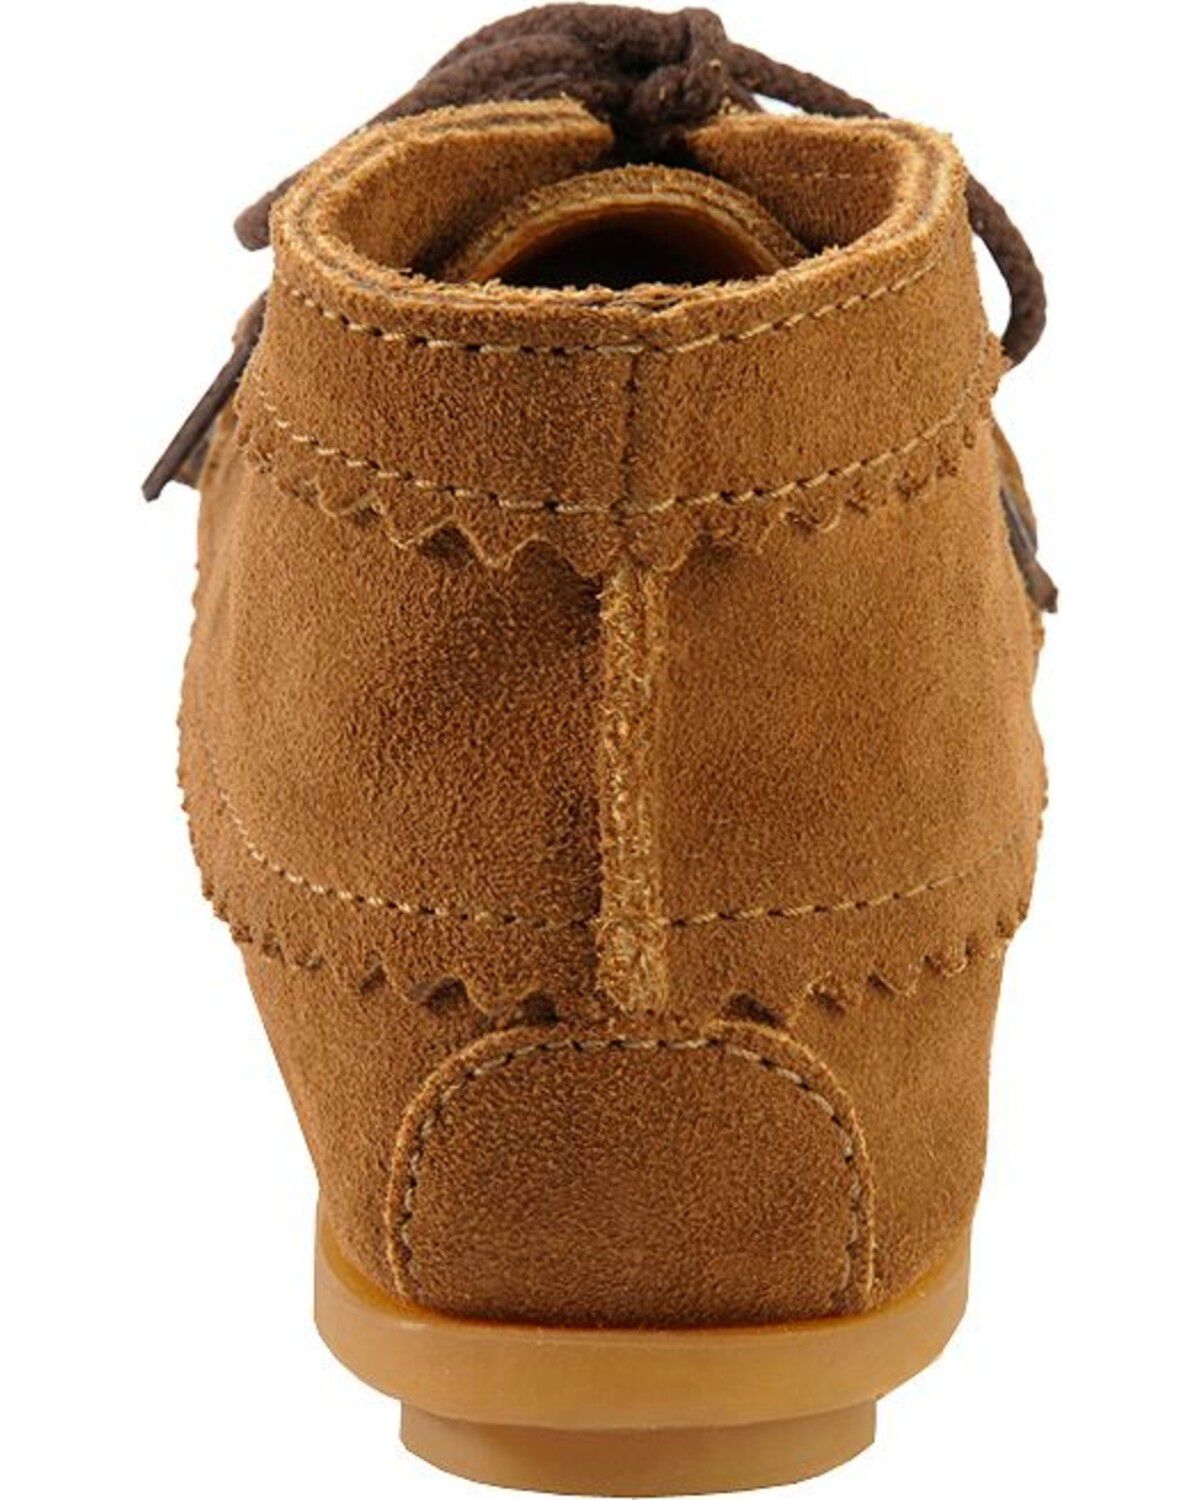 suede moccasin boots